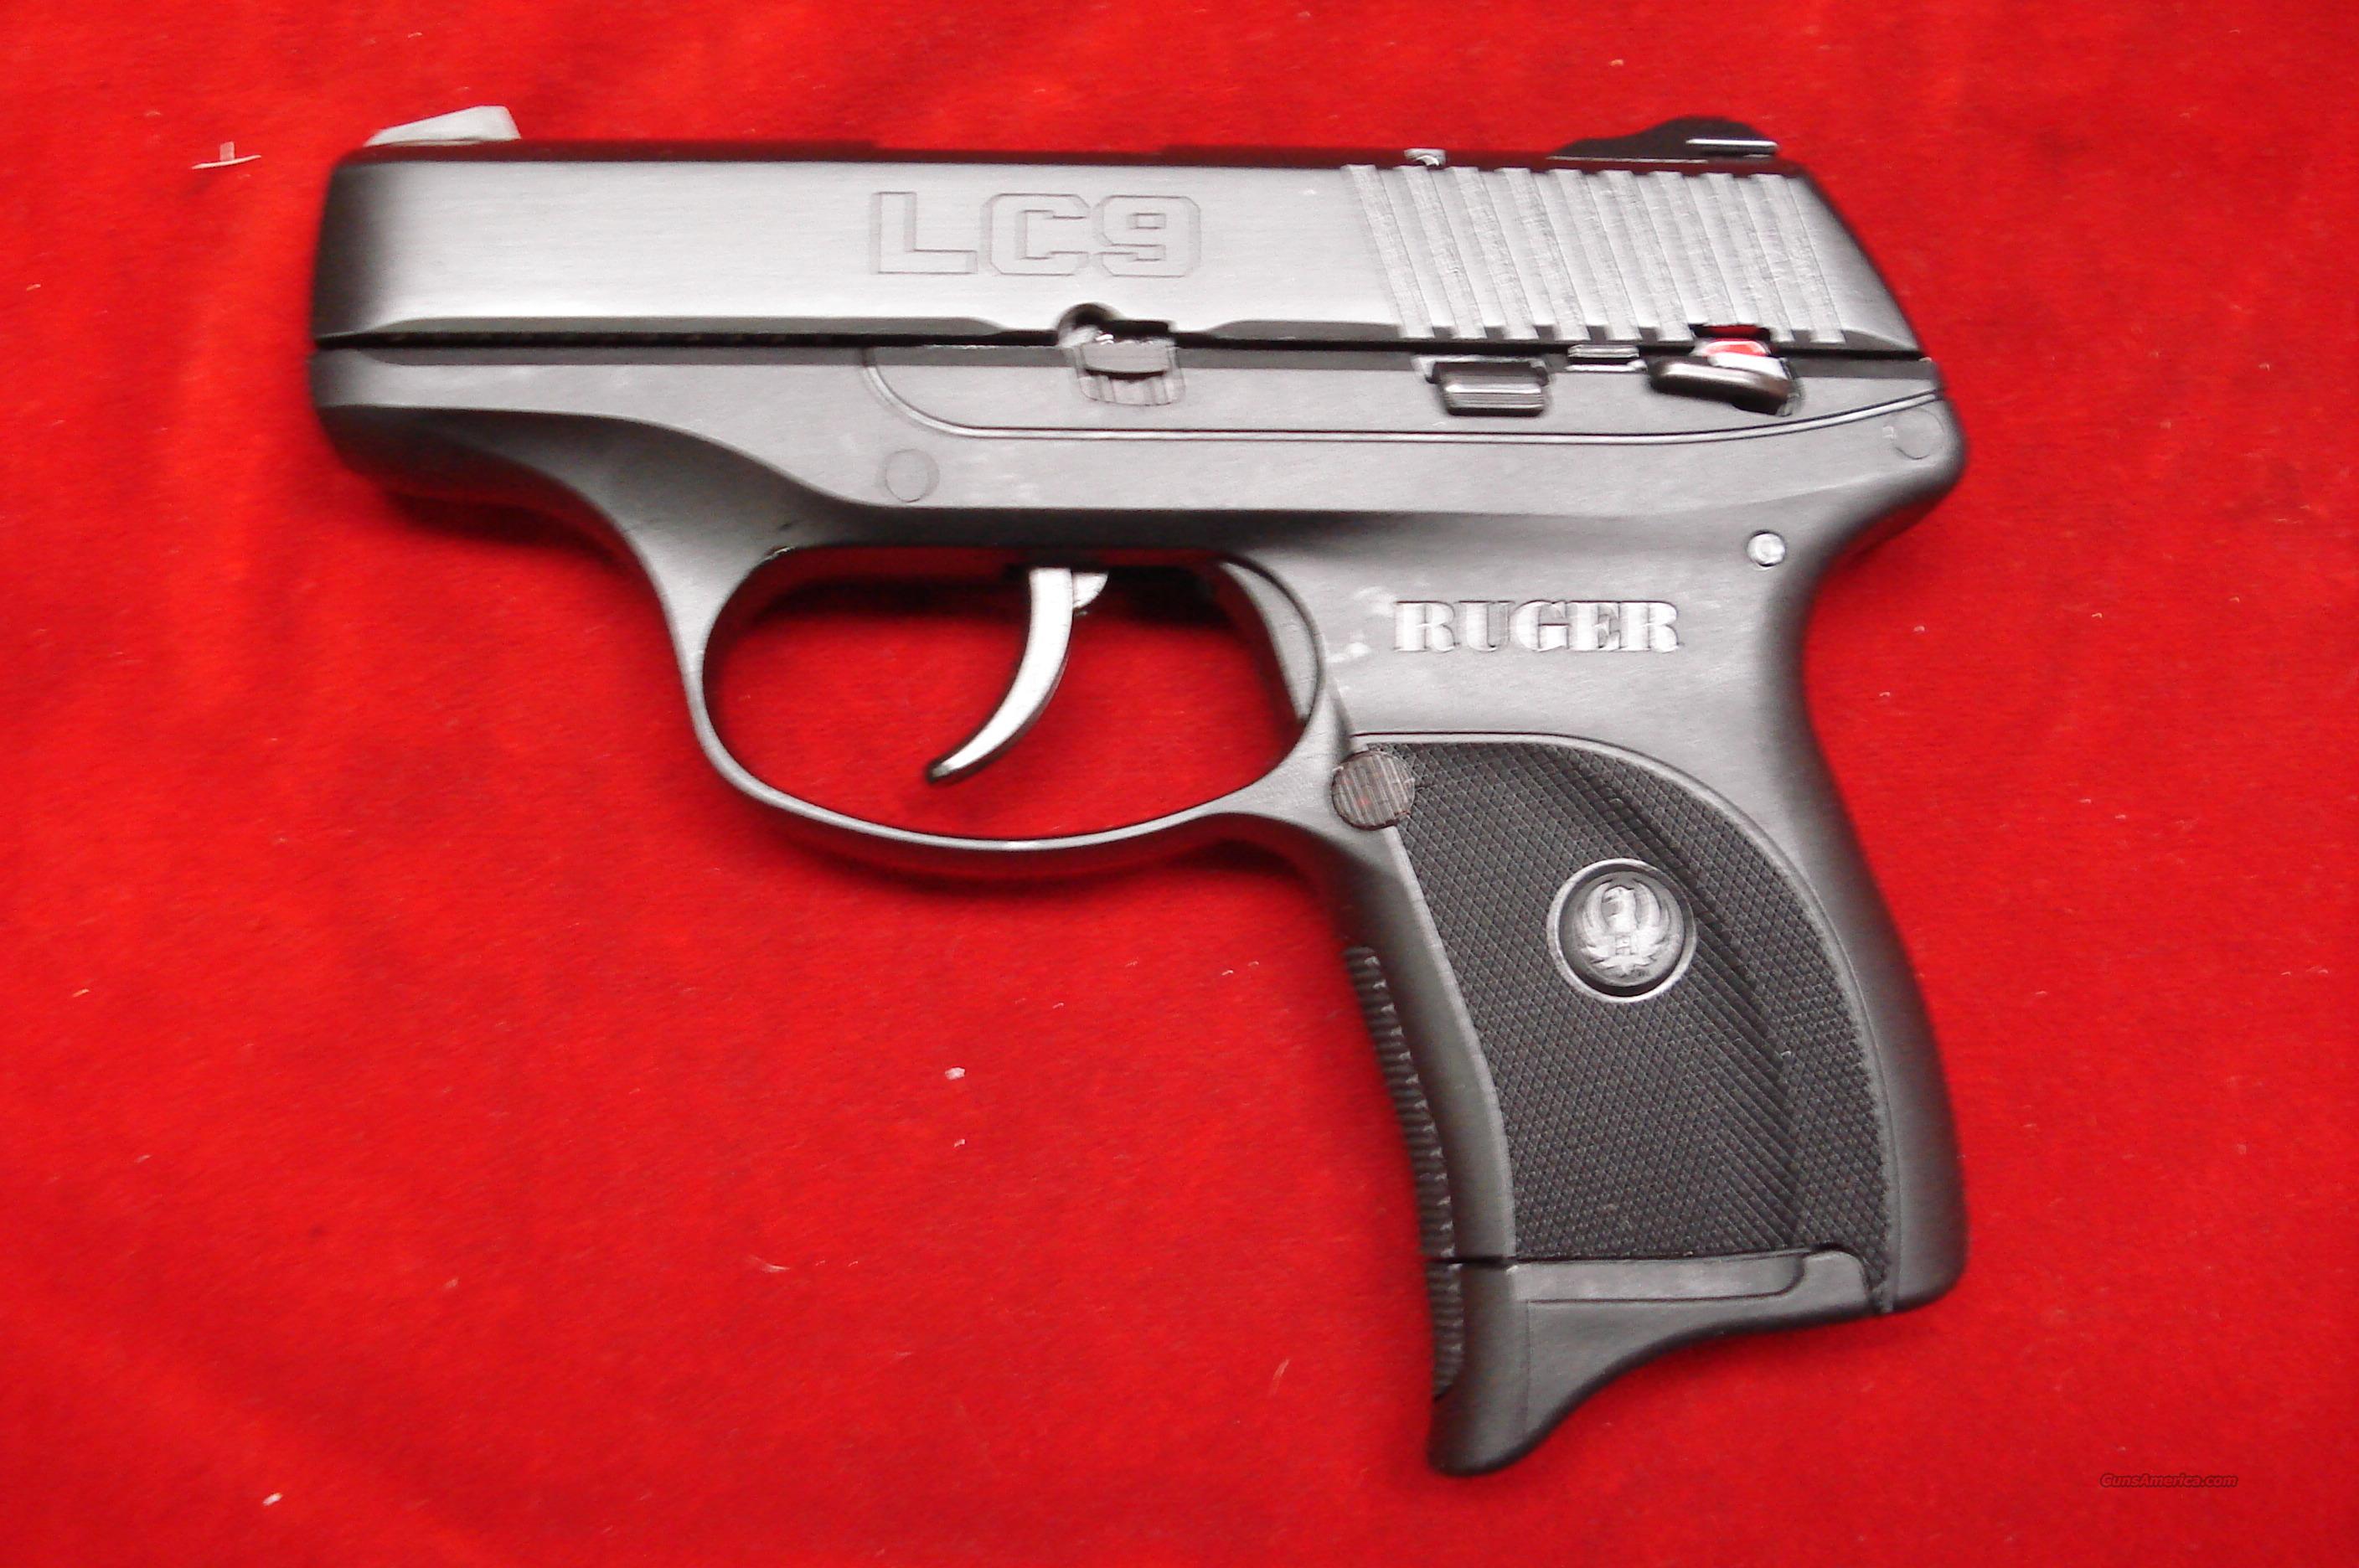 Ruger Lc9 Lightweight Compact Nin For Sale At 924535944 2882